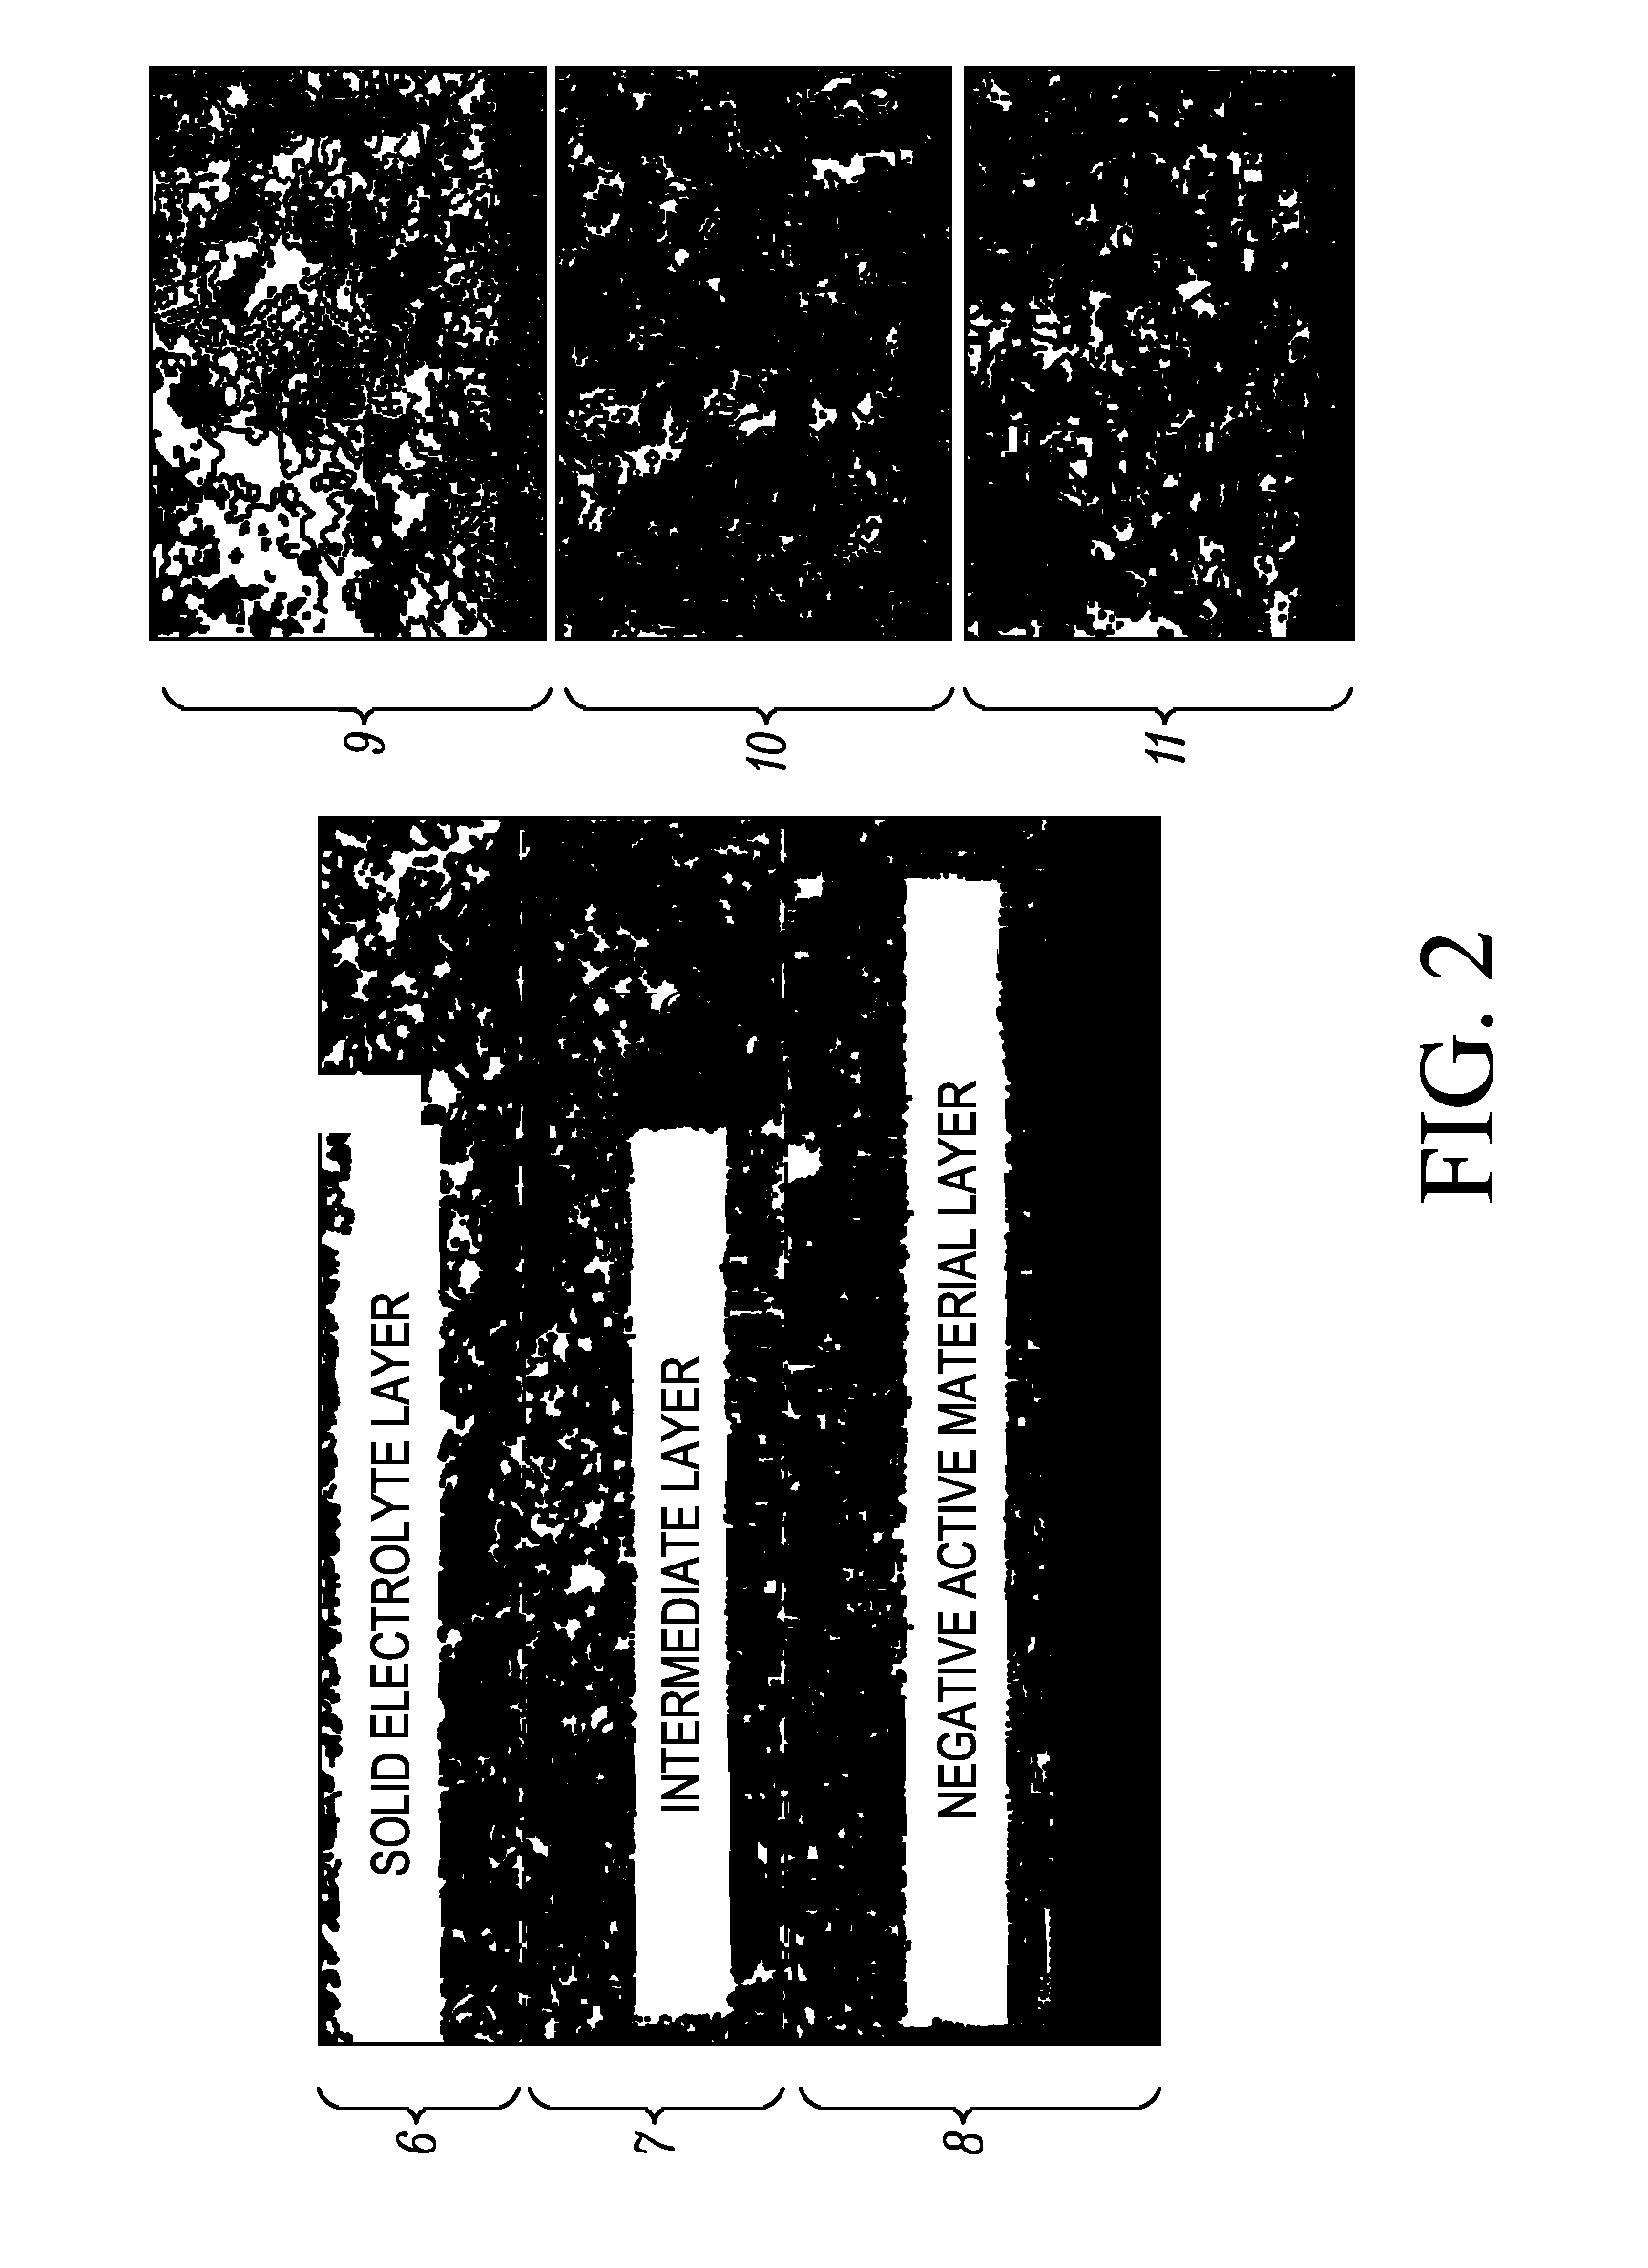 Lithium ion rechargeable battery and process for producing the lithium ion rechargeable battery